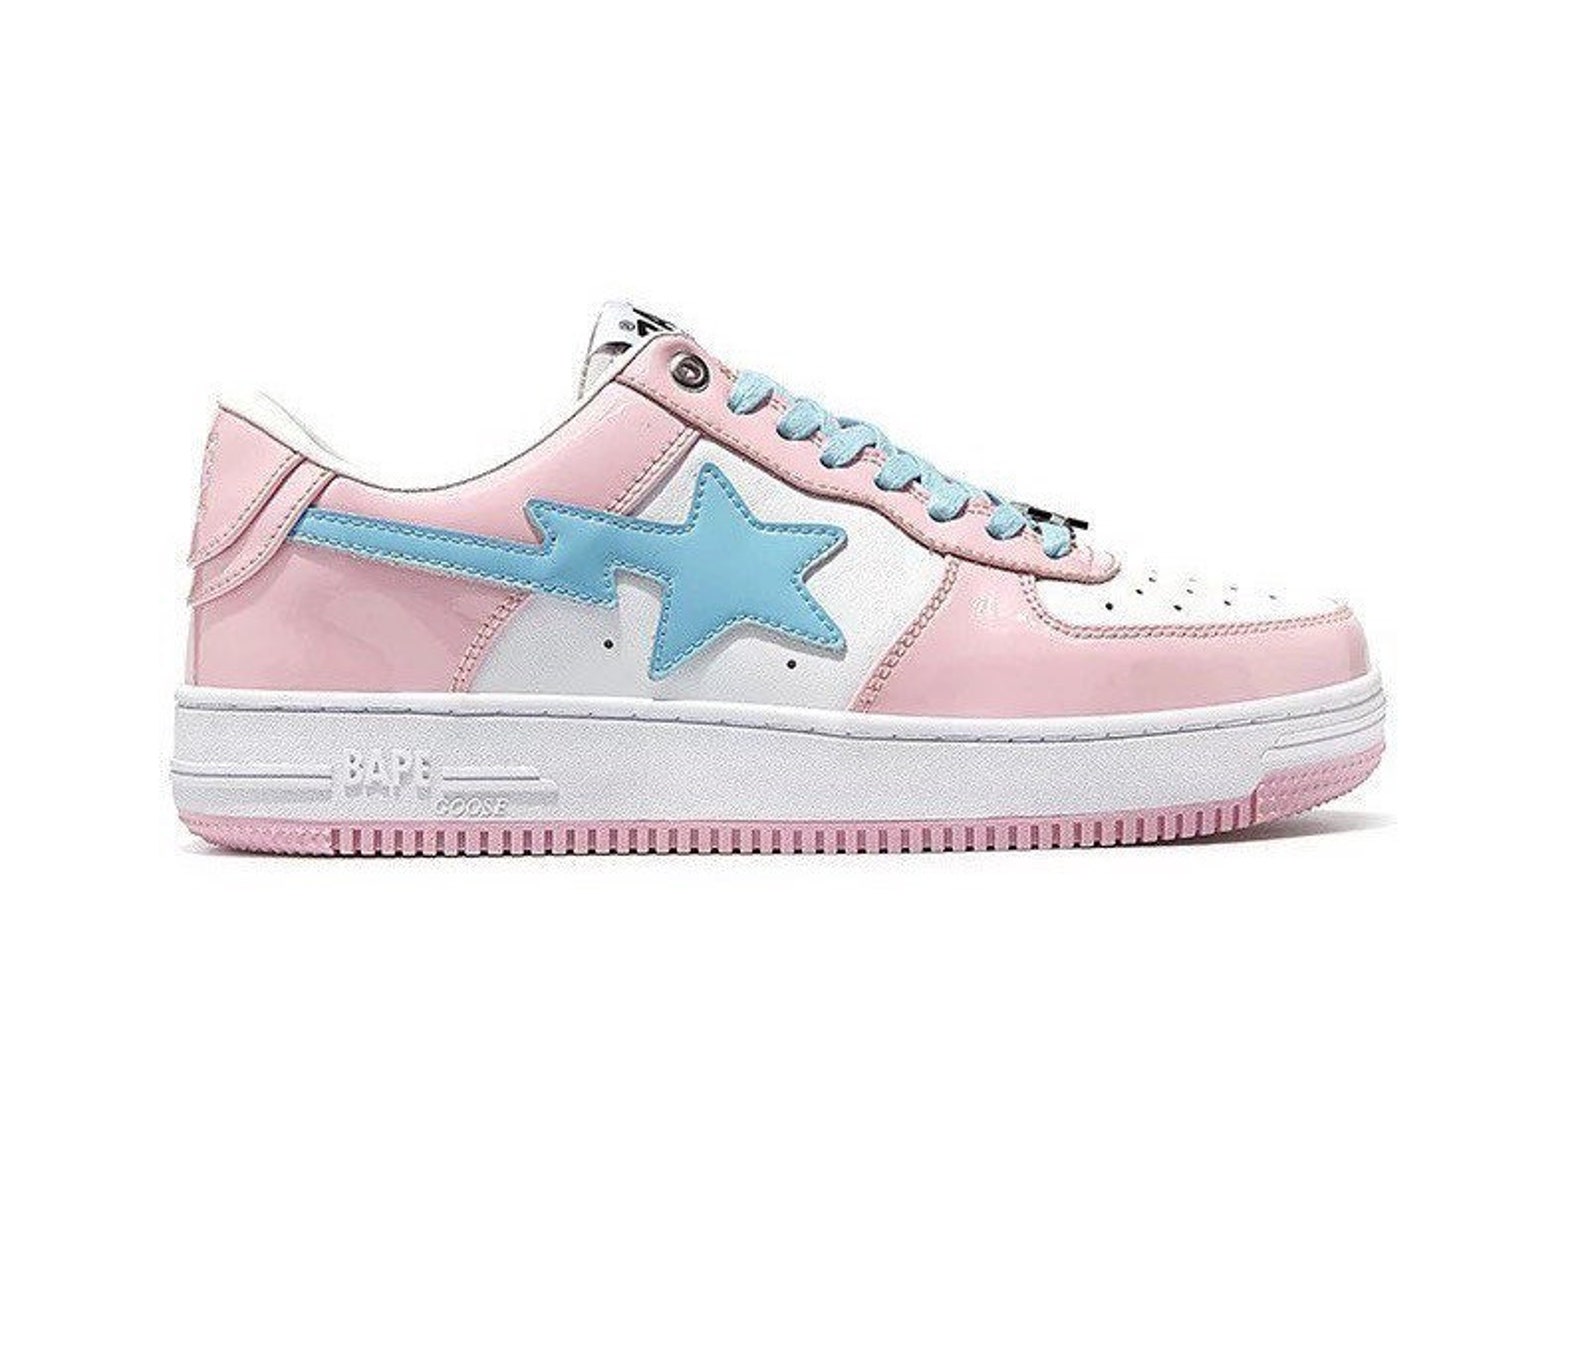 High Quality Bapesta Low Top Pink - Etsy